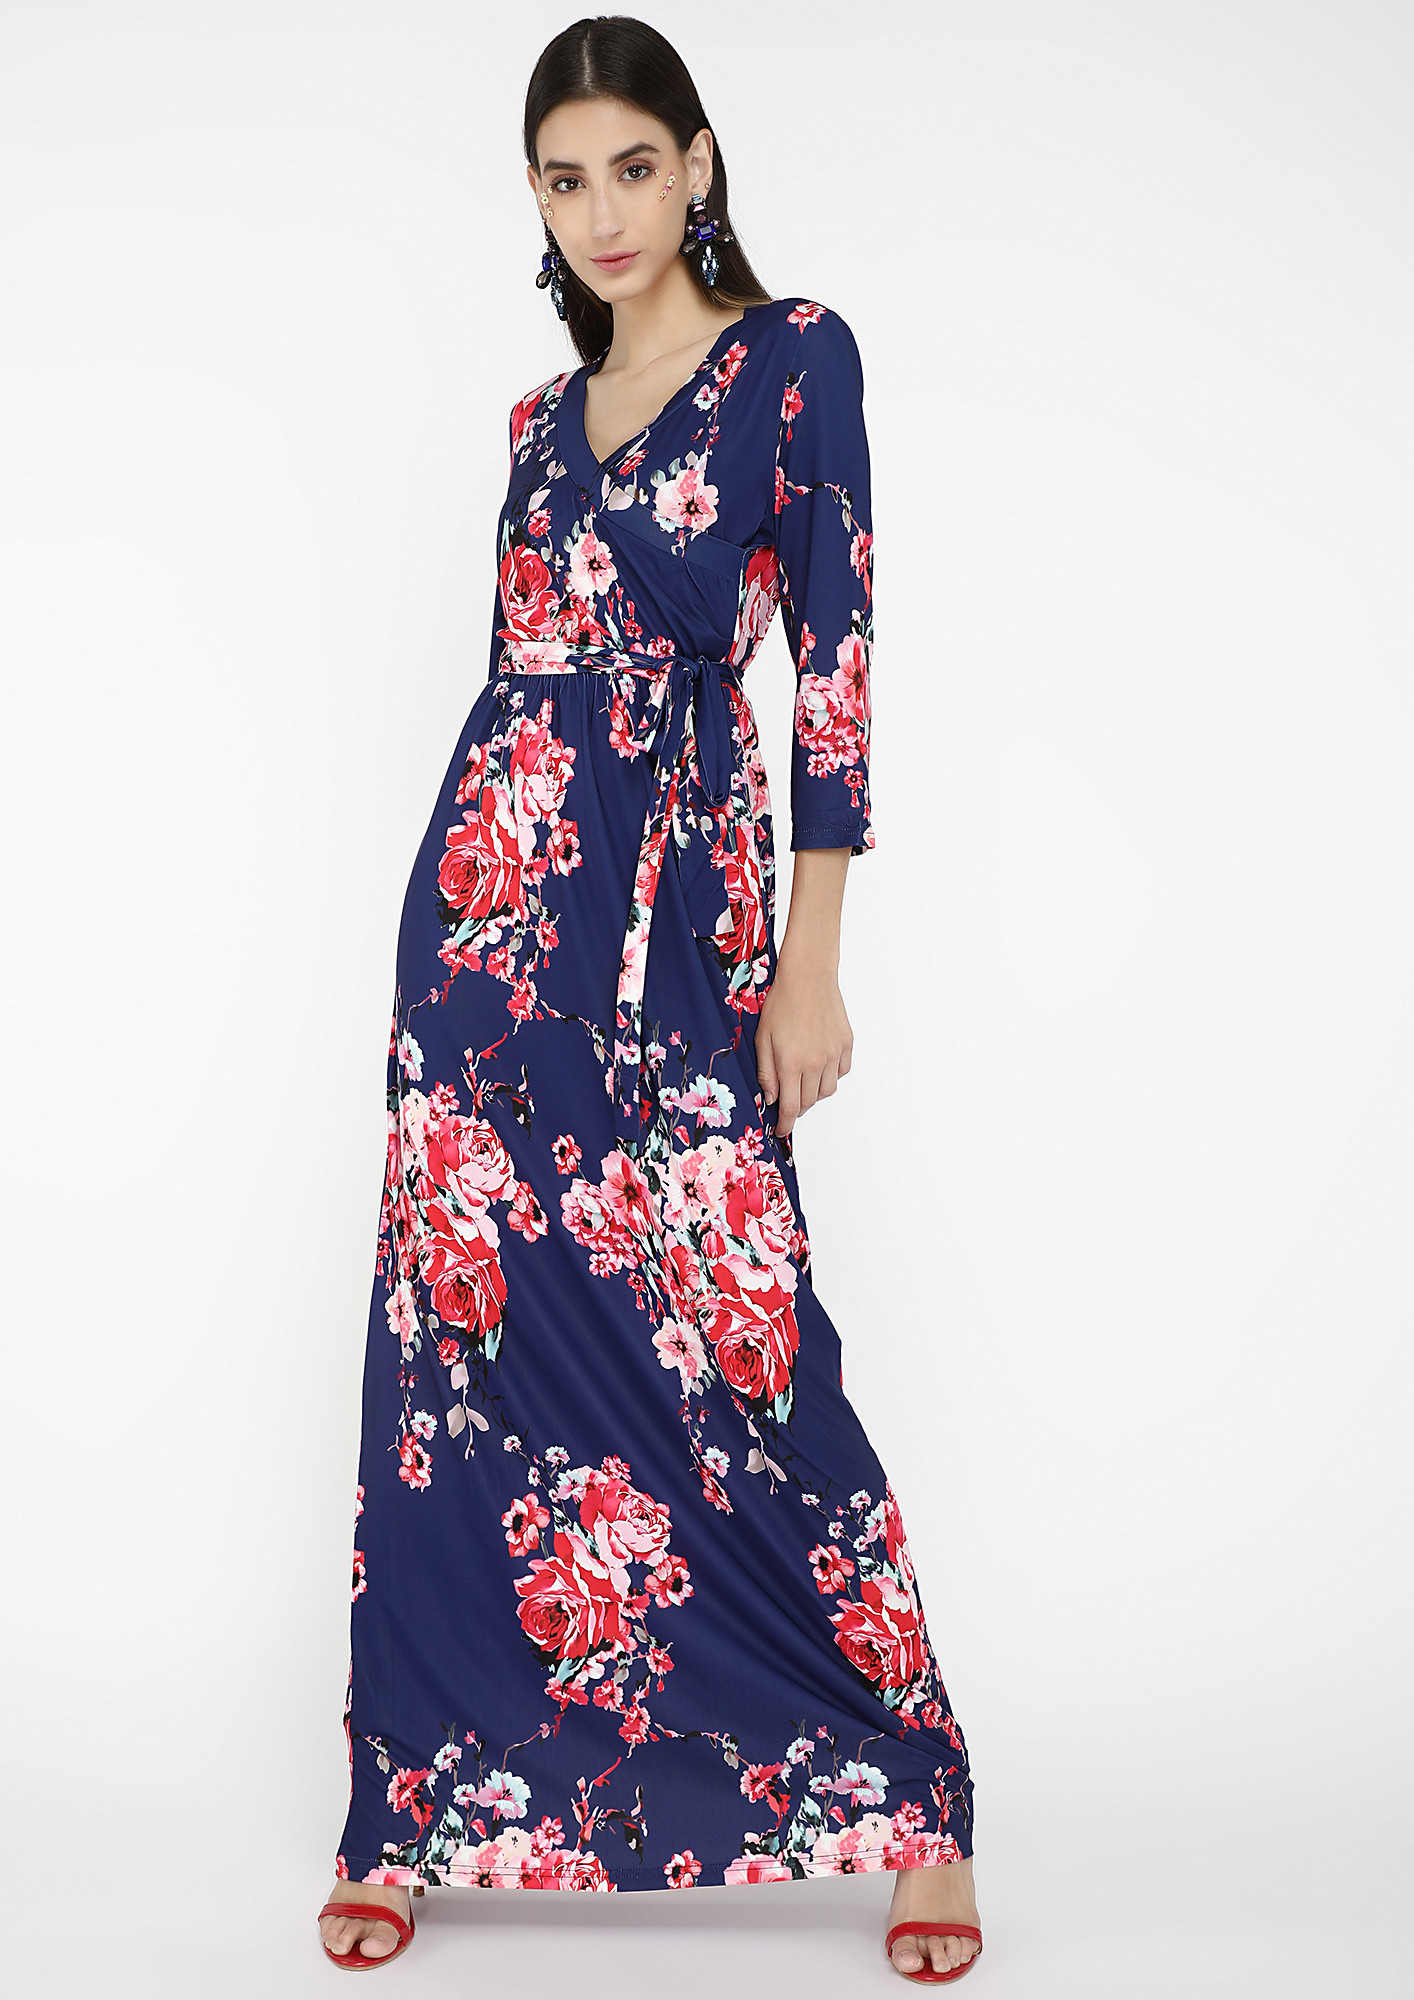 IN LOVE WITH FLORAL NAVY BLUE MAXI DRESS